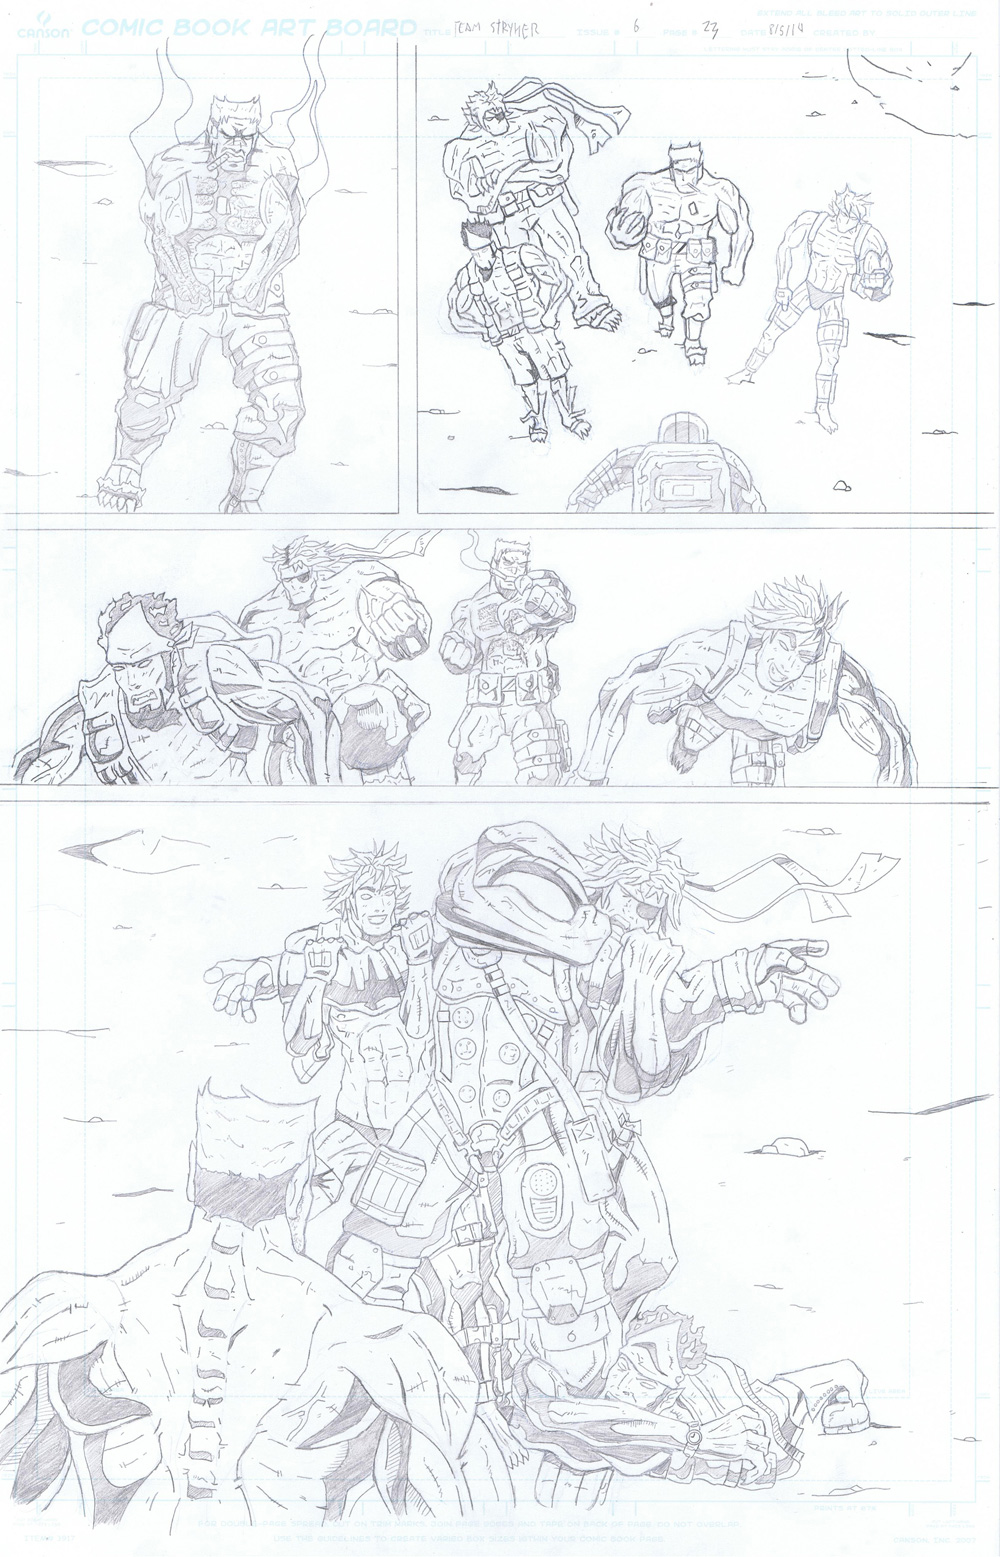 MISSION 006: PAGE 23 PENCIL